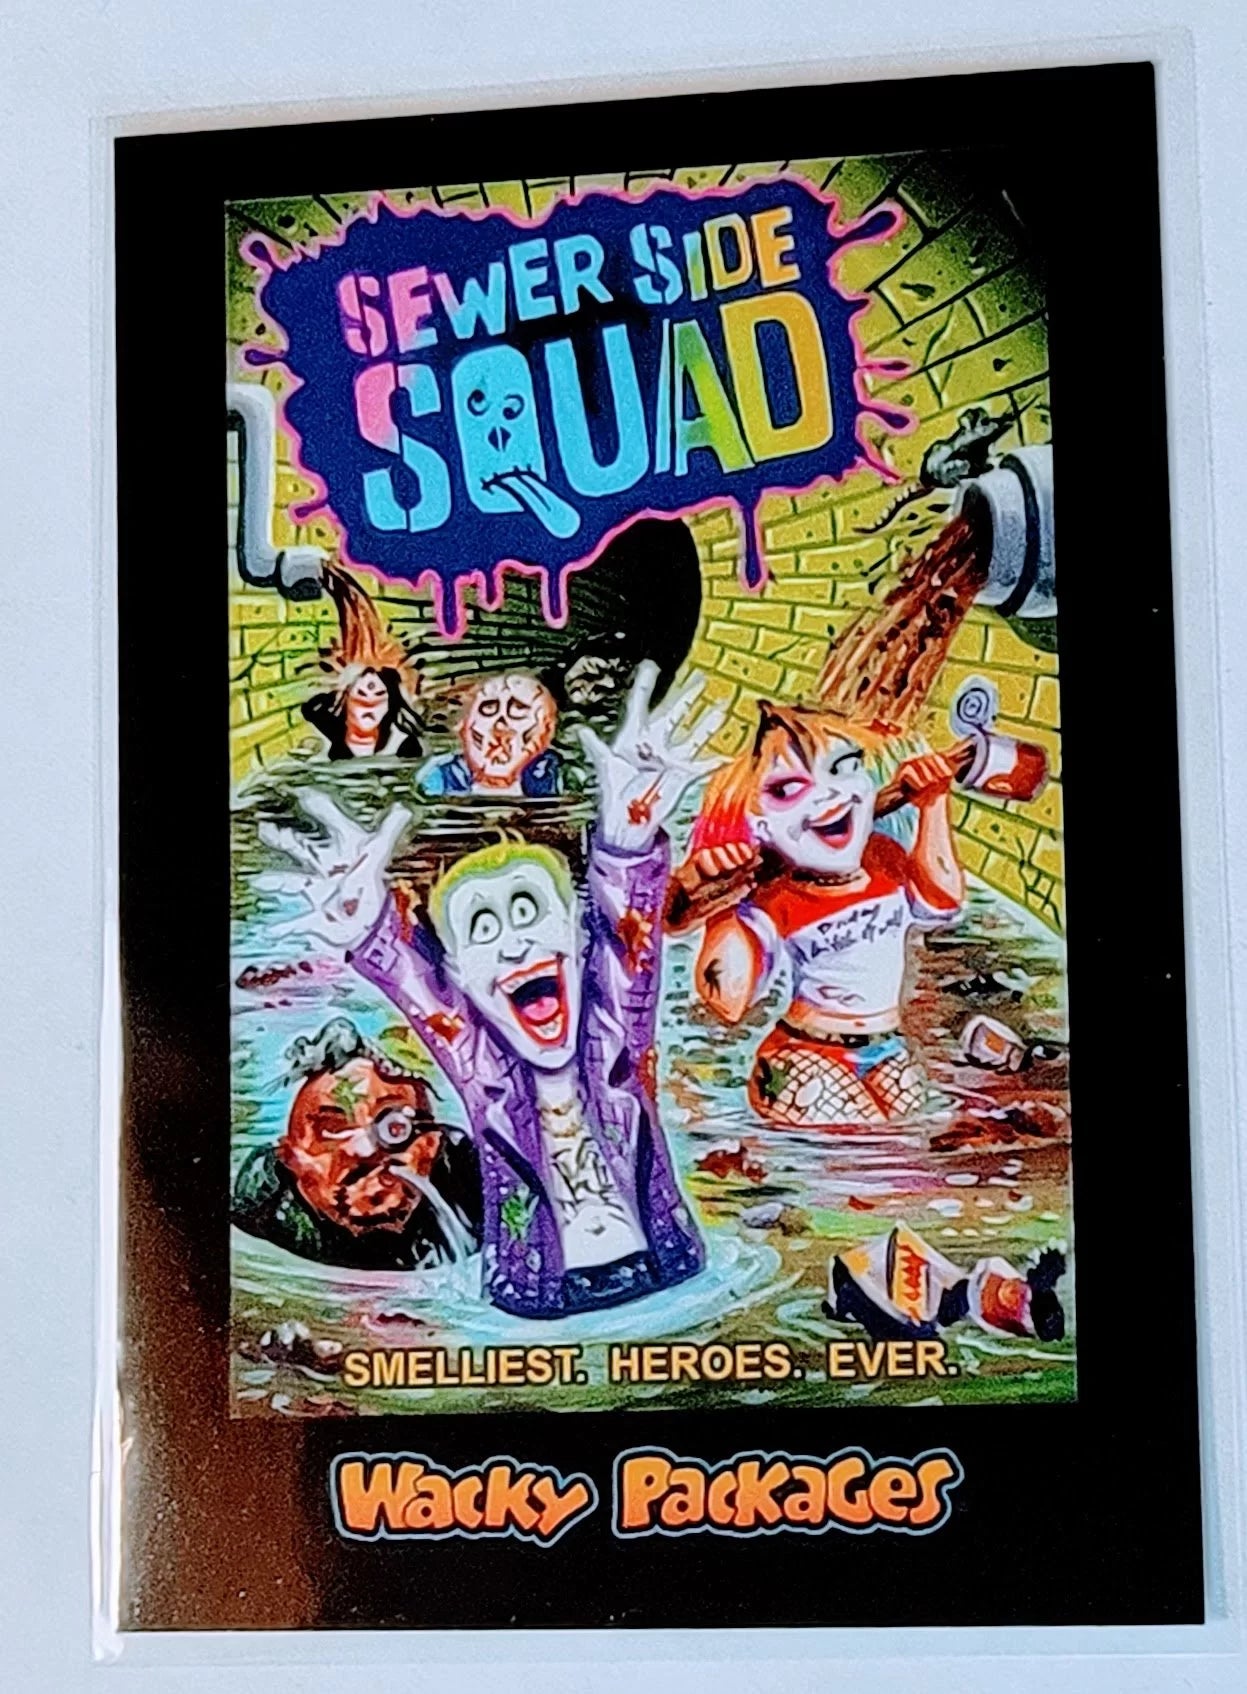 2018 Topps Wacky Packages Go to the Movies Sewer Side Squad #10 Sticker Trading Card MCSC1 simple Xclusive Collectibles   